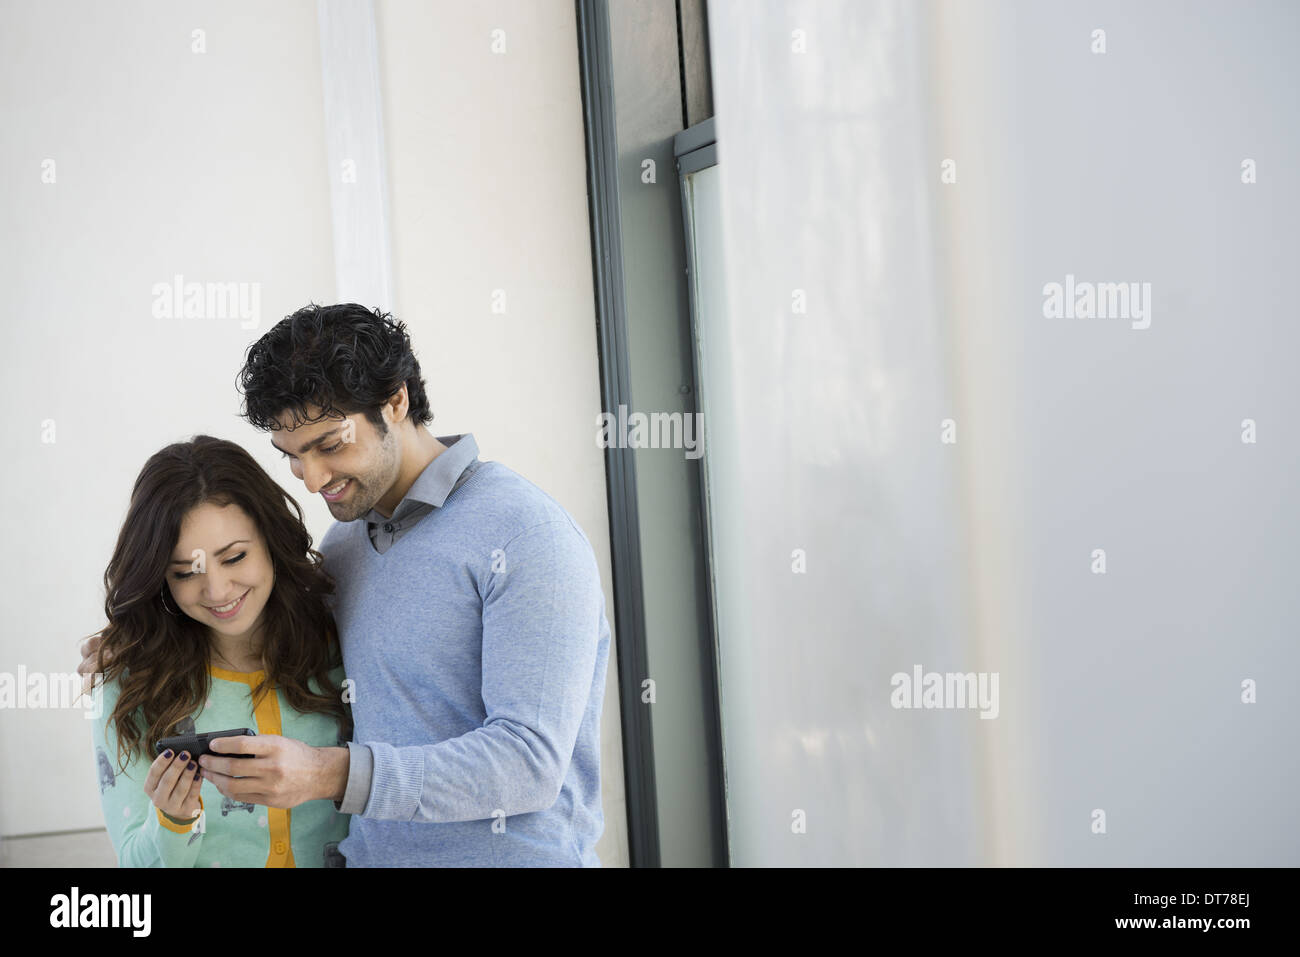 Urban Lifestyle. A young couple, man and woman side by side, looking at a mobile phone. Stock Photo